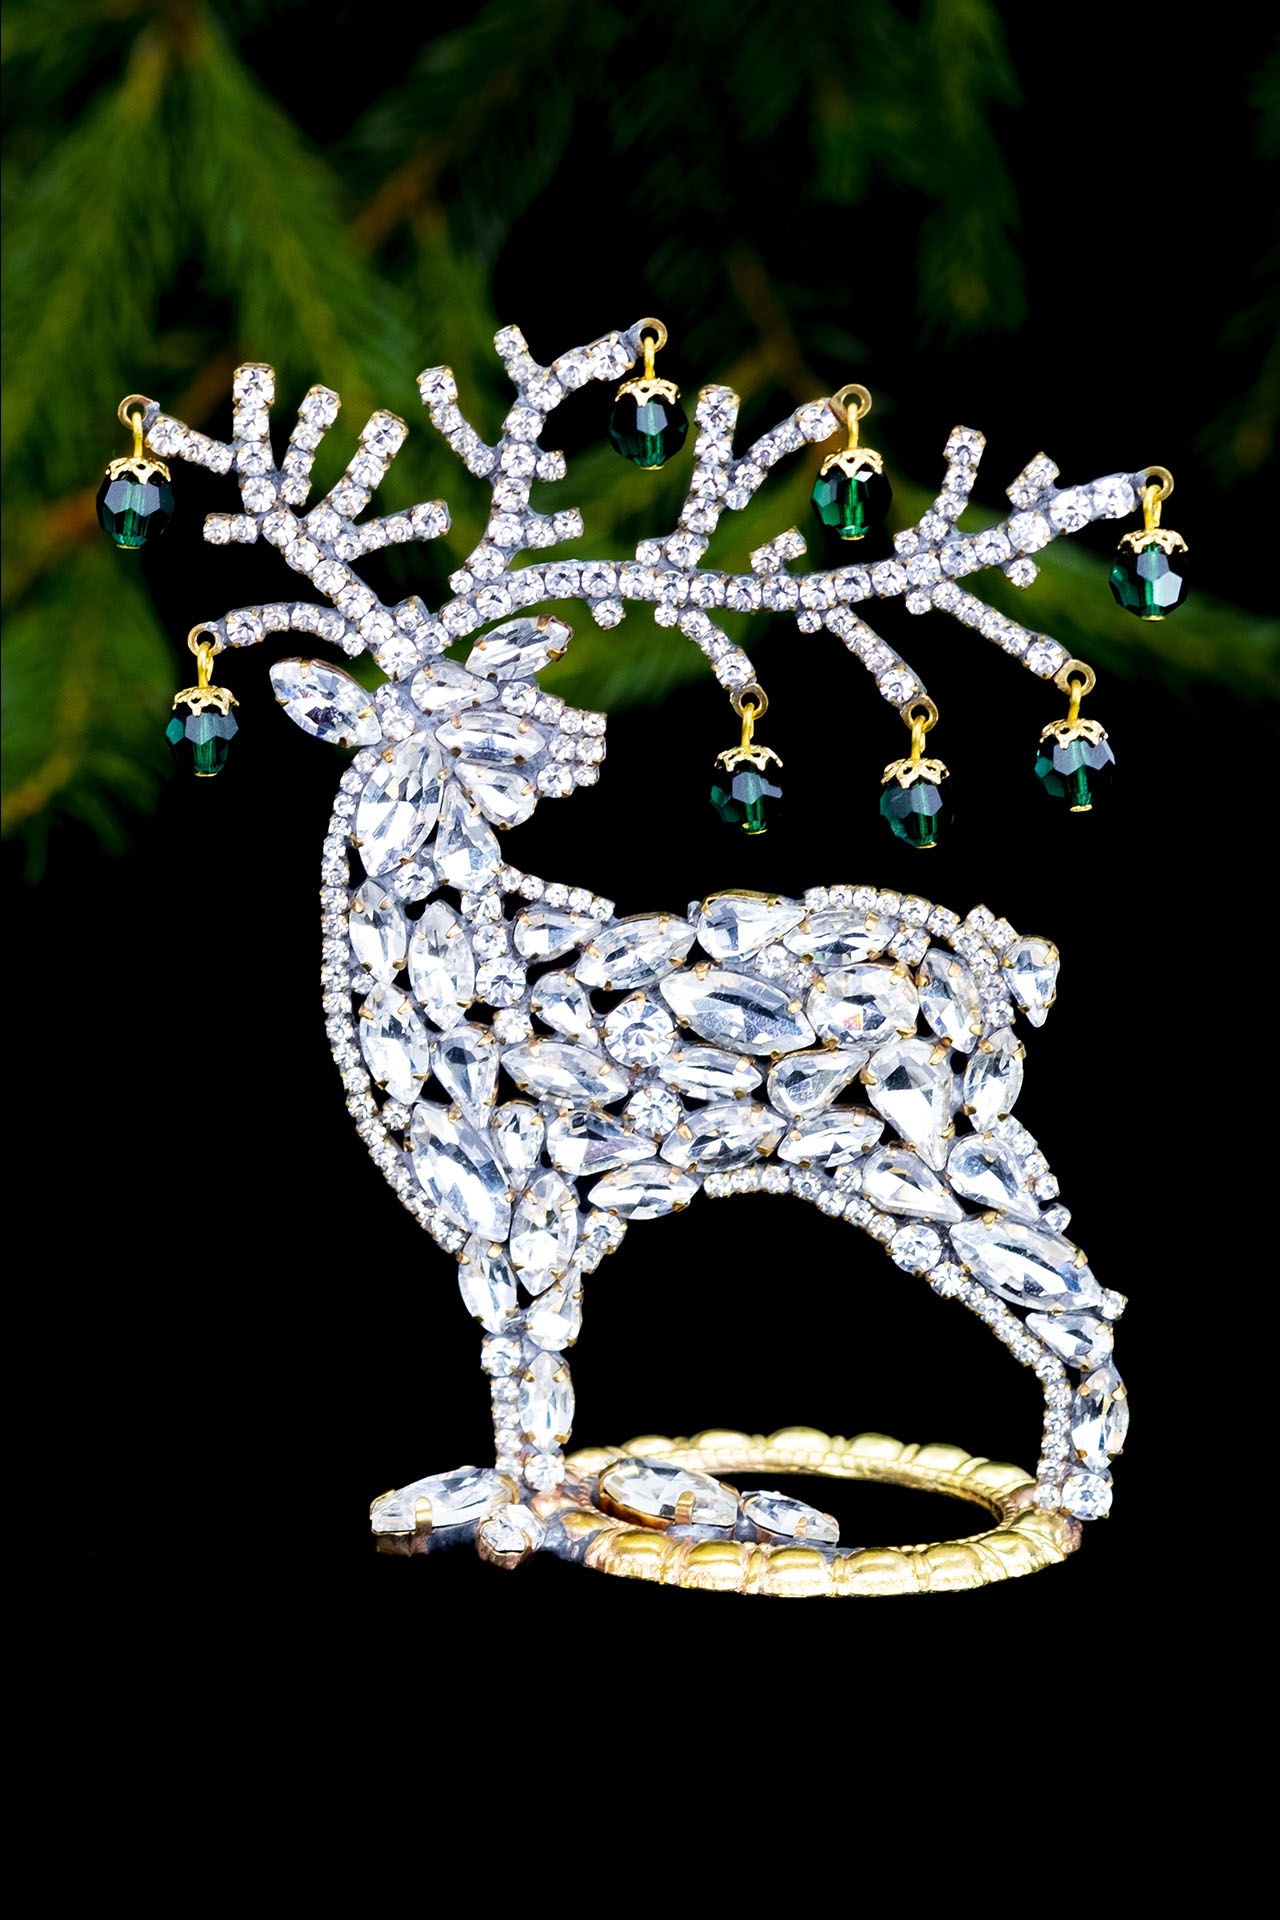 Christmas decoration - Reindeer with clear and green rhinestones